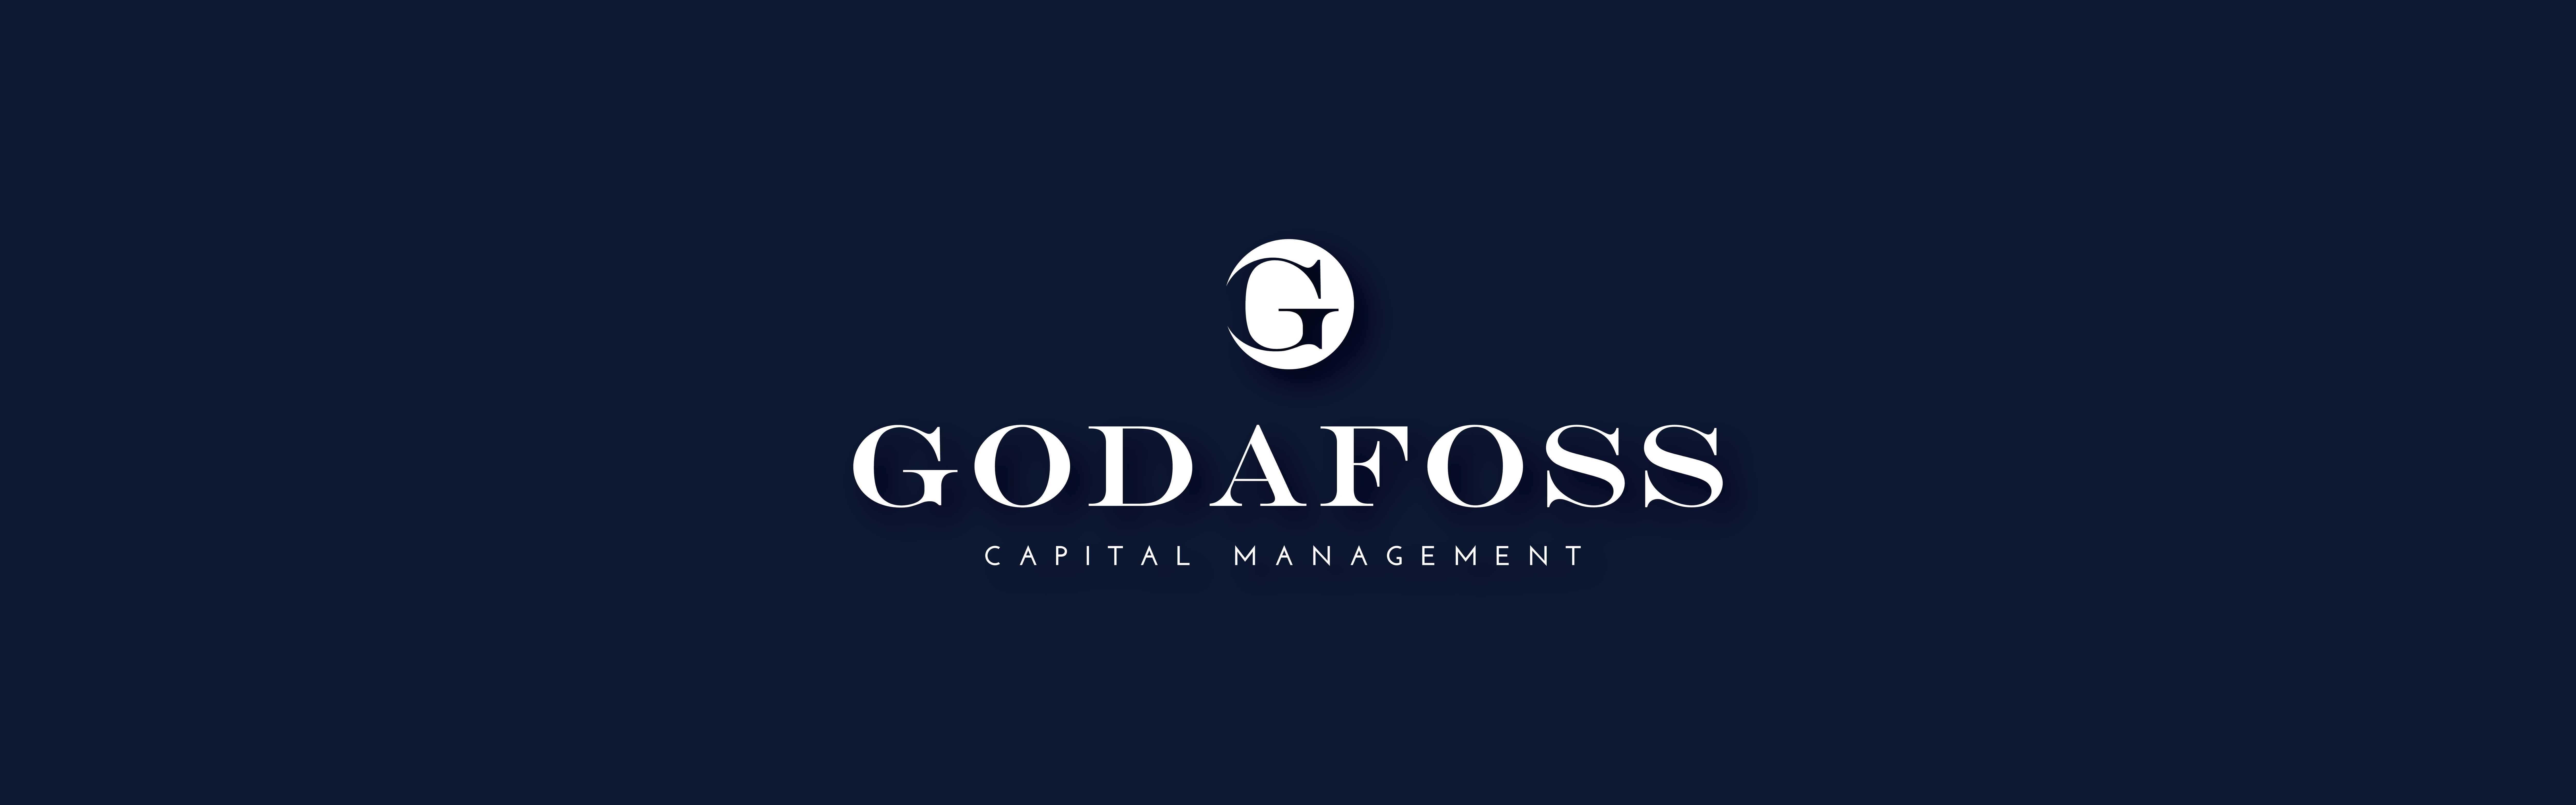 Company logo of "Godafoss Capital Management" with an emblem above the text, set against a dark blue background.